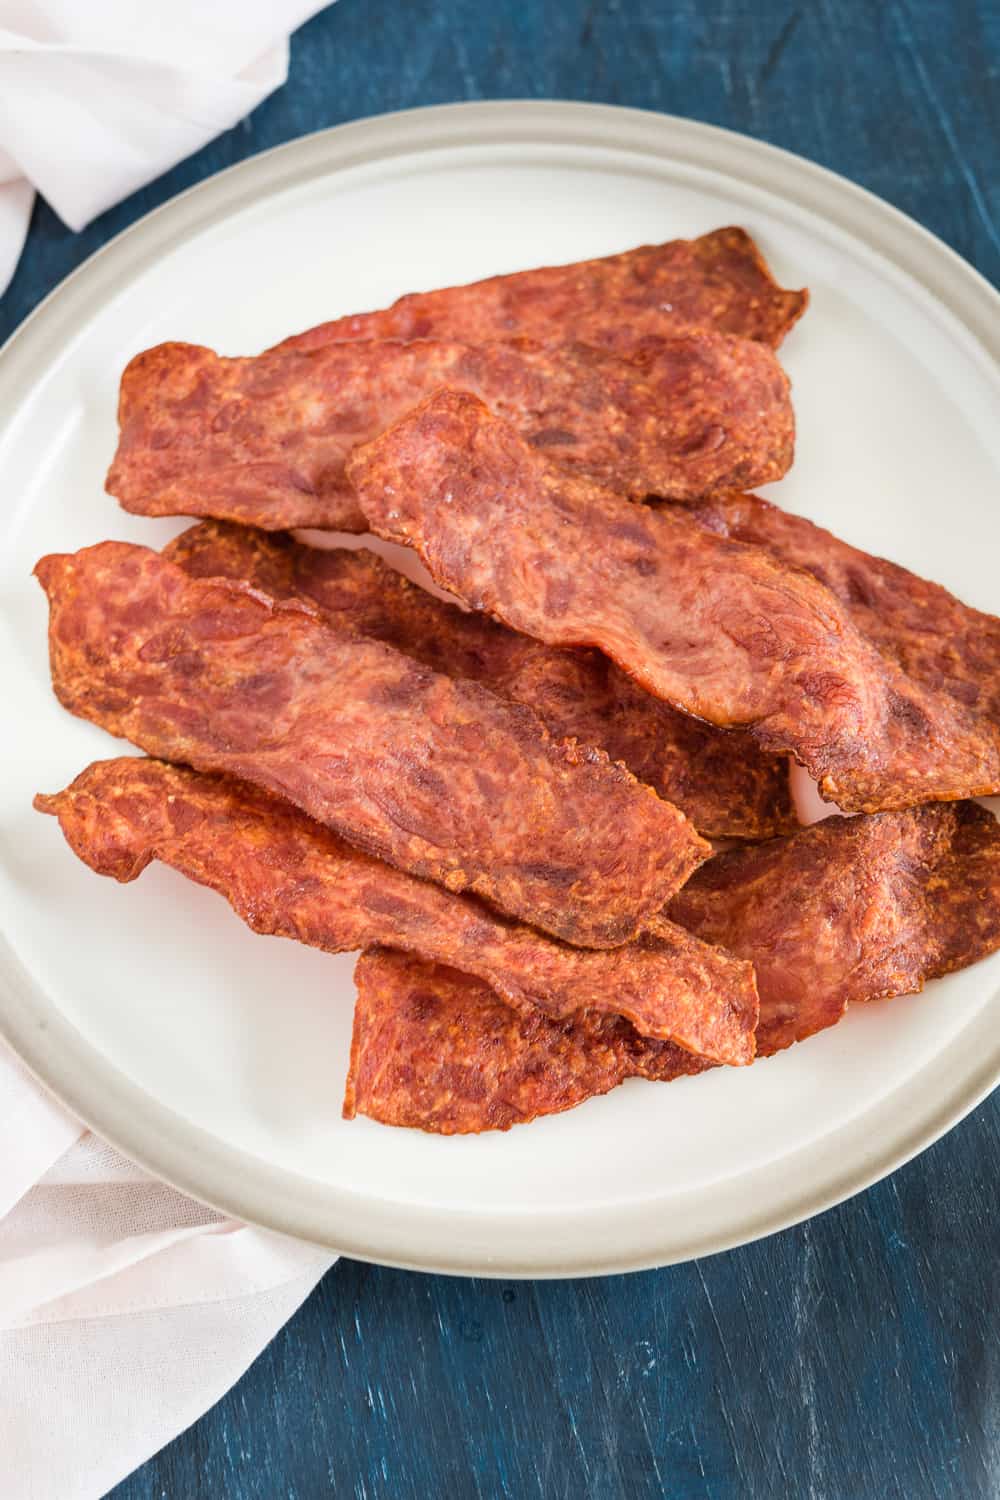 Keep a piece of cooked turkey bacon in the air fryer. the back has plates with other slices.